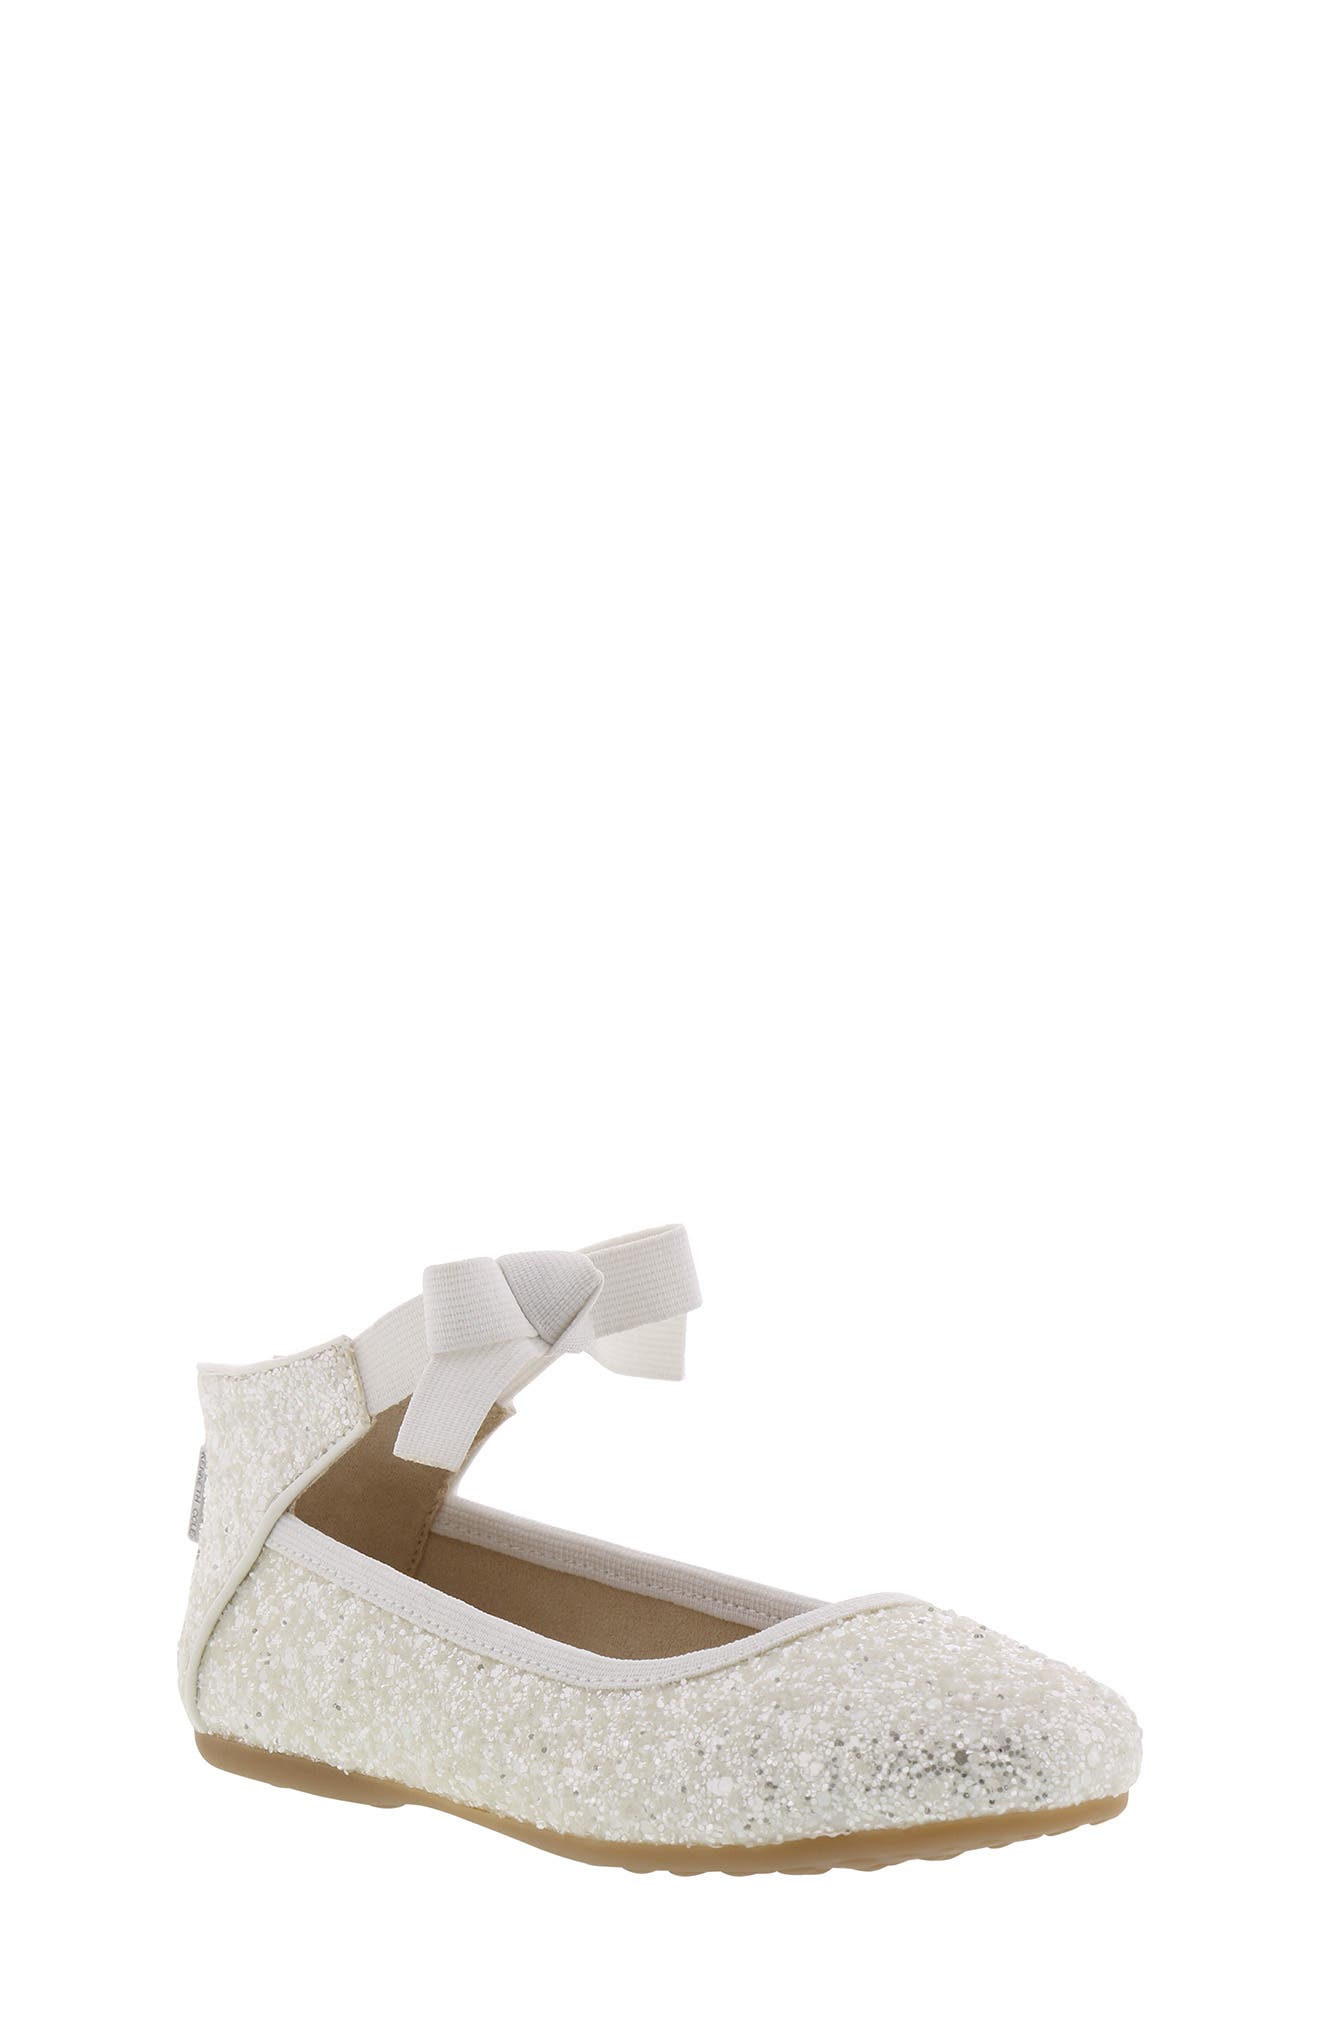 kids white dolly shoes